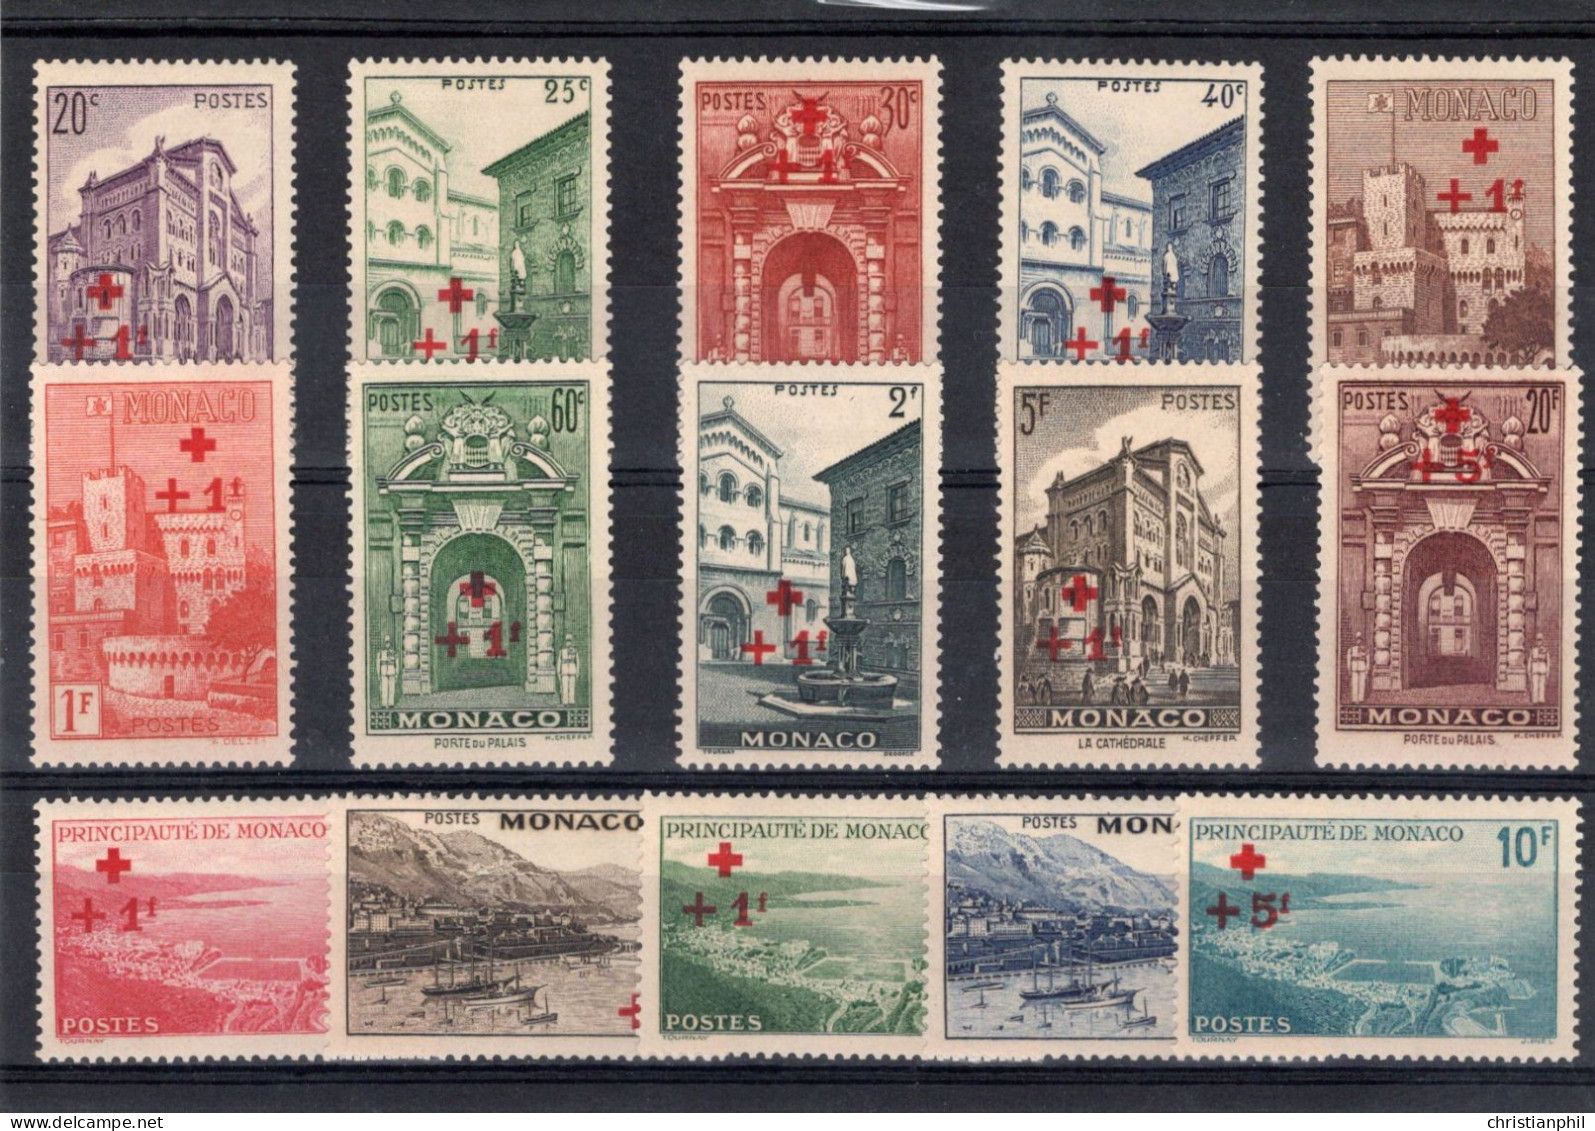 TIMBRES MONACO CROIX-ROUGE  . ANNEE 1940   N° 200 à 214. NEUF * - Neufs